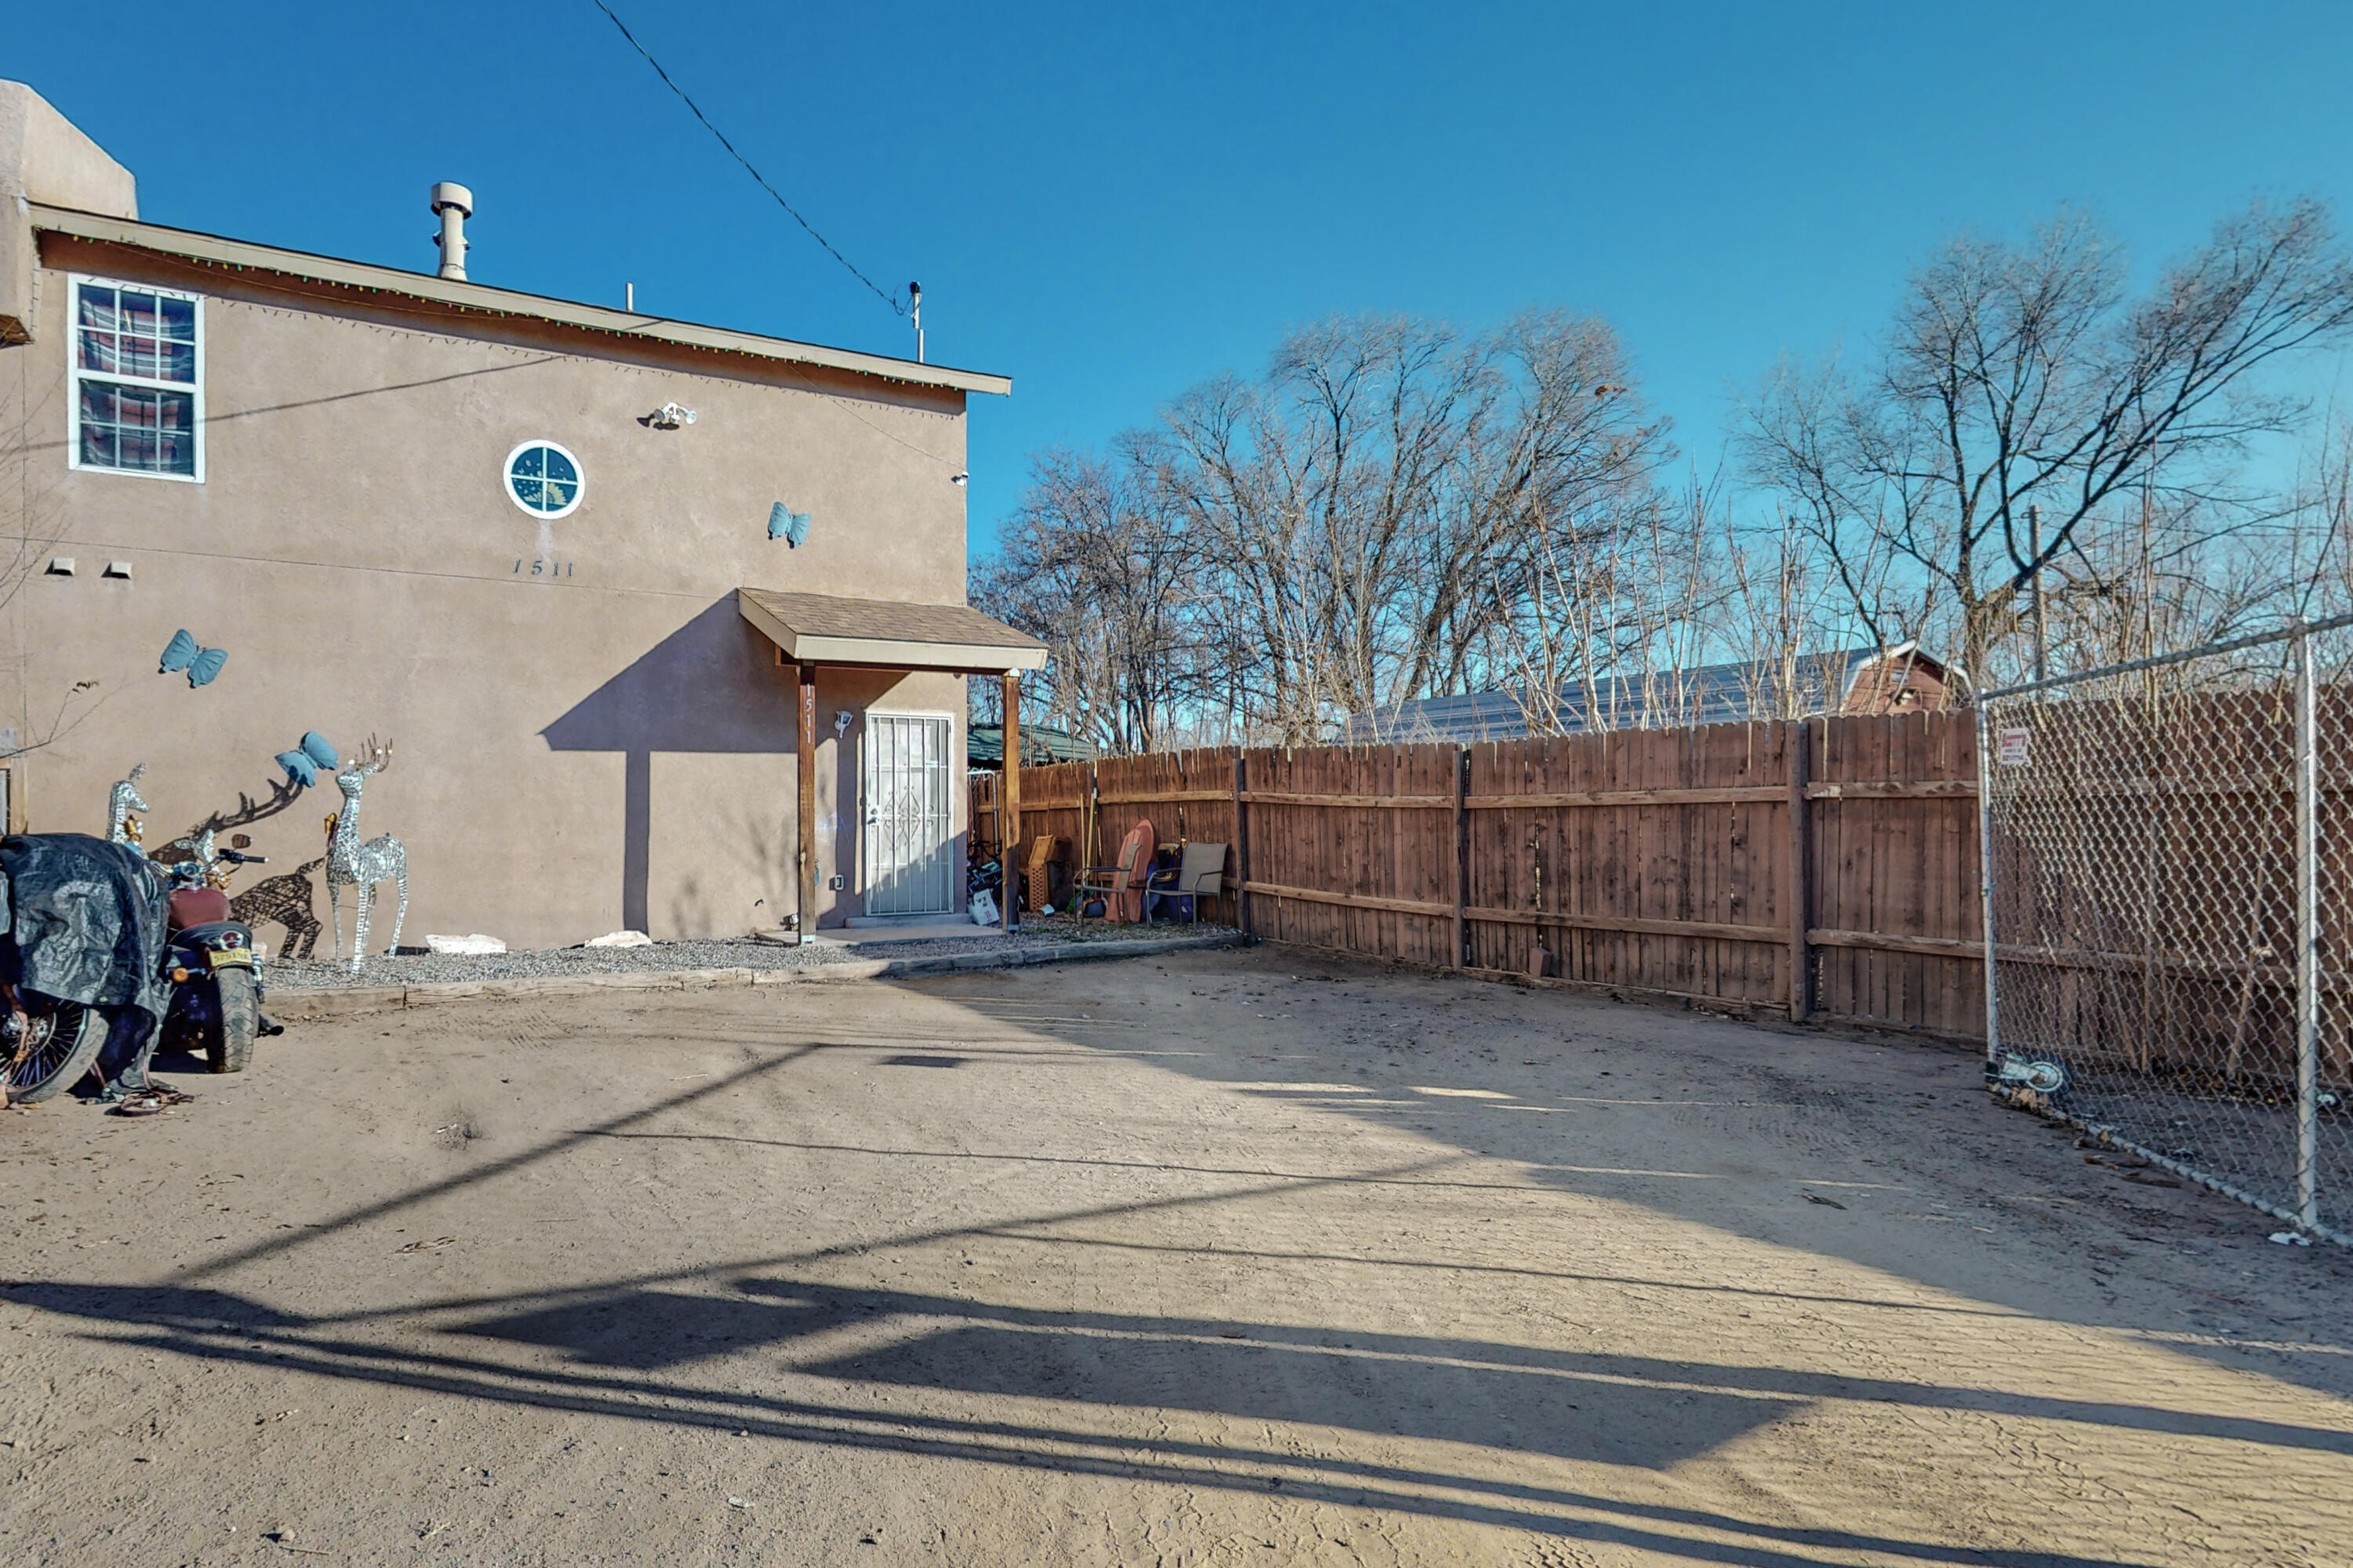 Embrace the opportunity to add your personal touch to this promising SW Heights residence. Envision the potential for customization and transformation. This three-bedroom, 3 home invites you to unleash your creativity!